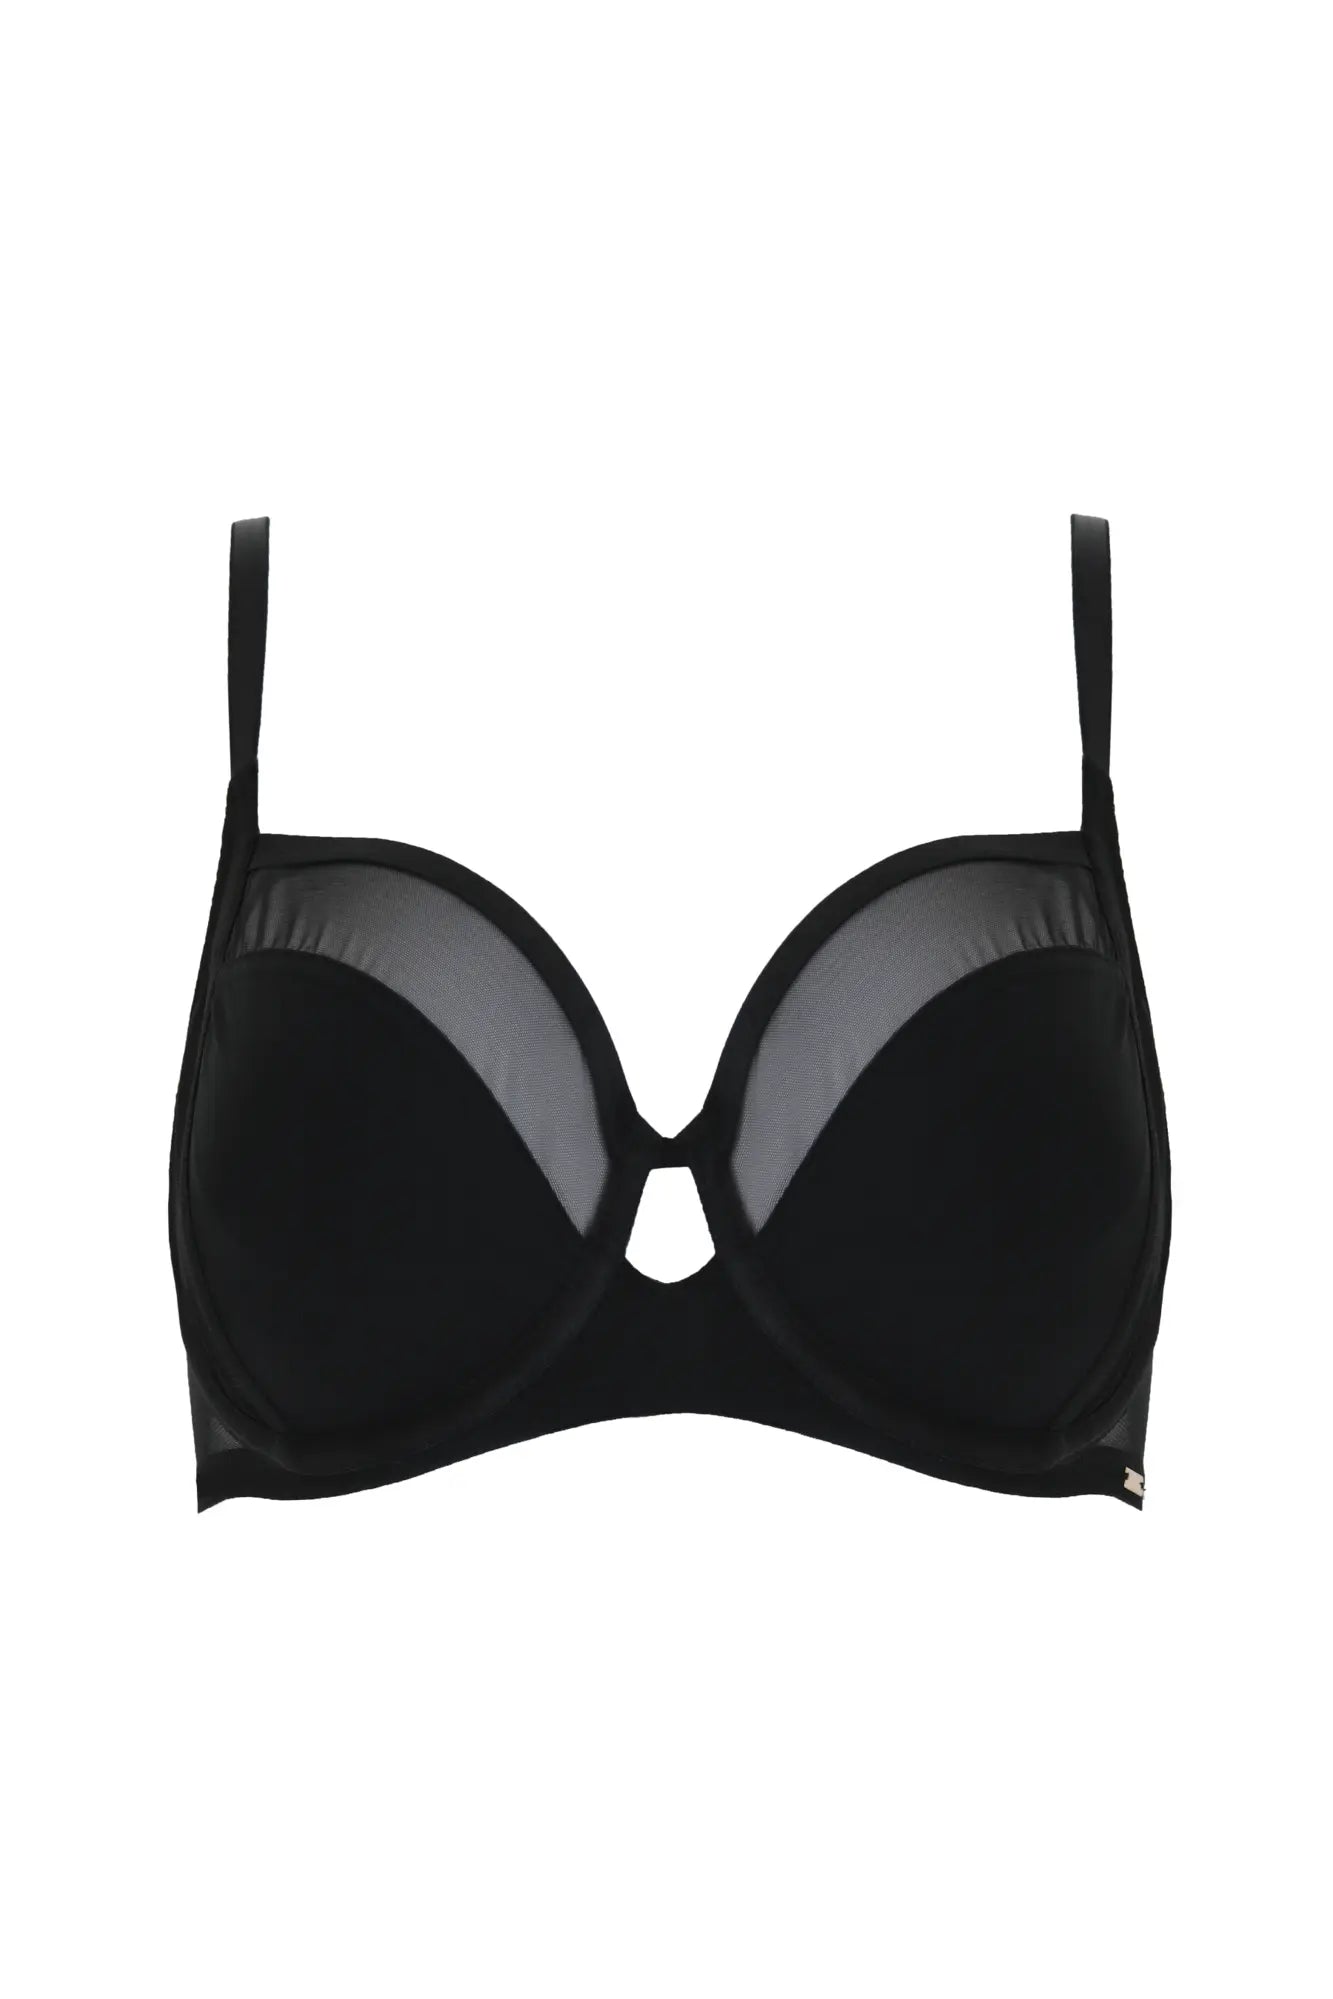 India Sheer & Opaque Underwired Bra In Black - Pour Moi